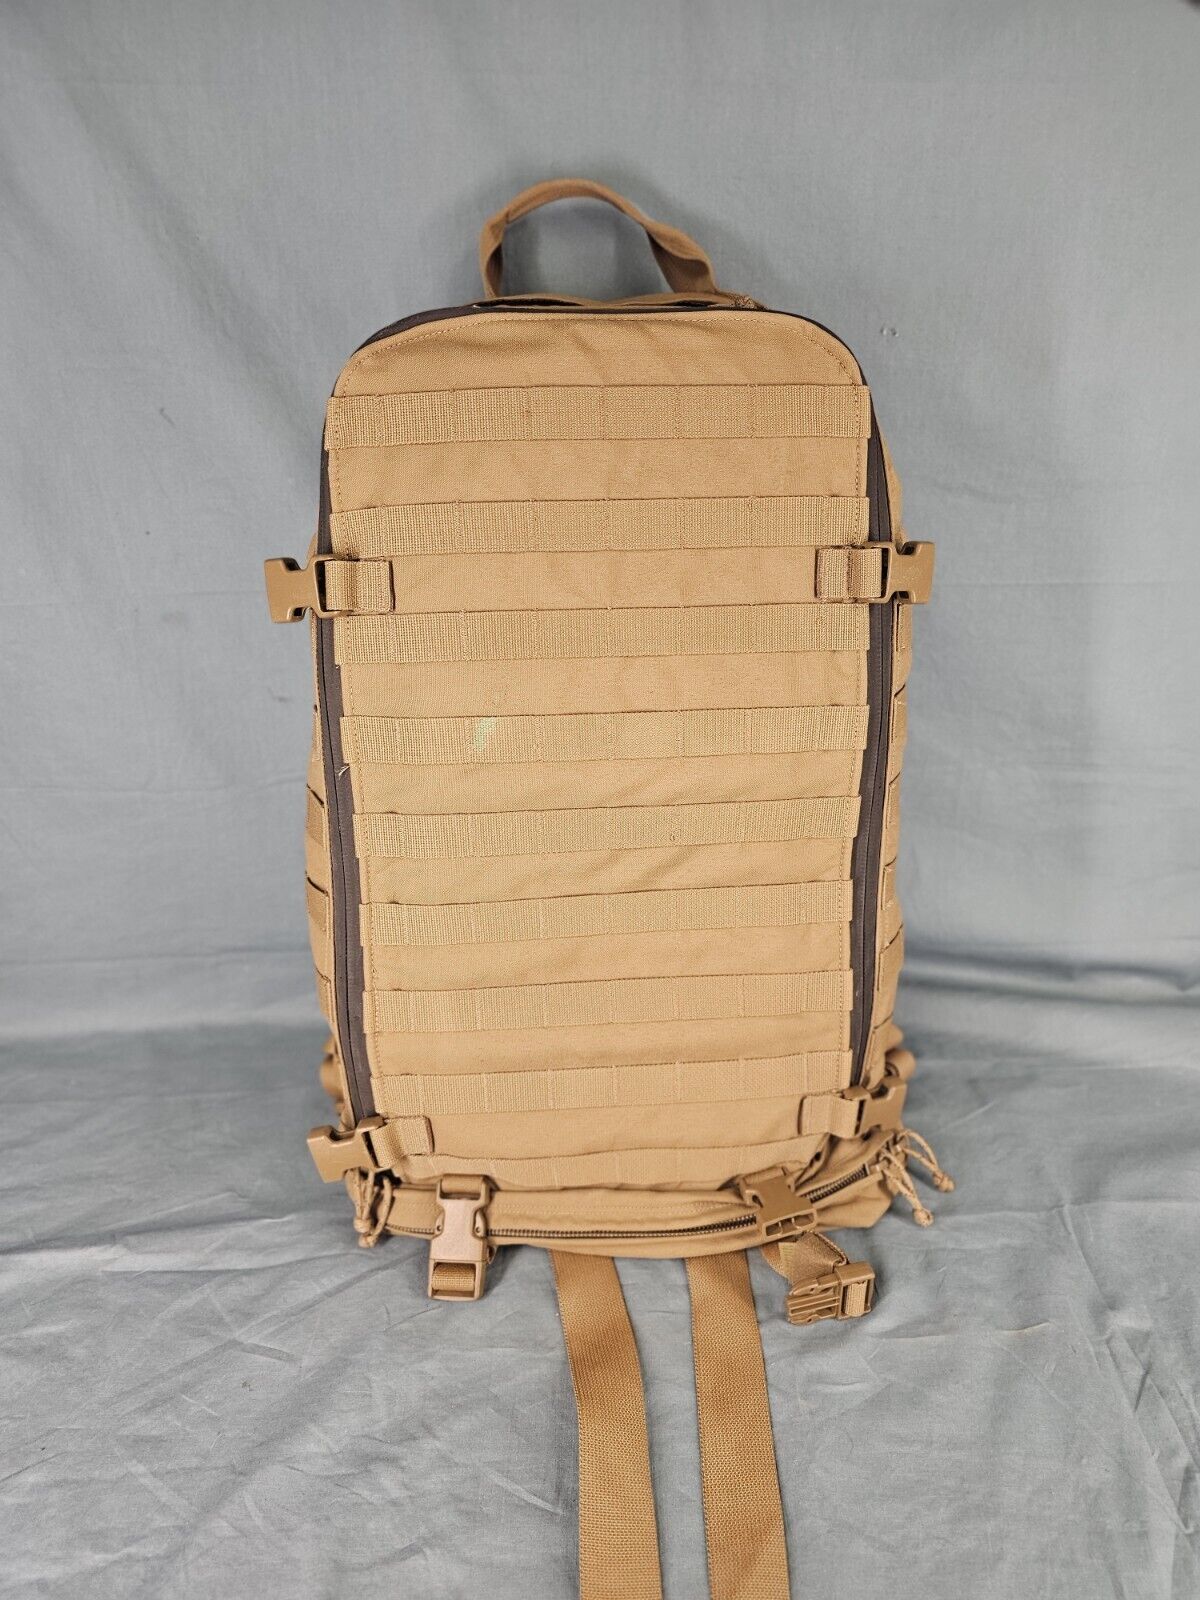 Corpsman Medical Assault Pack CAS USMC COMPLET KIT BOTH BAGS AND POUCHES